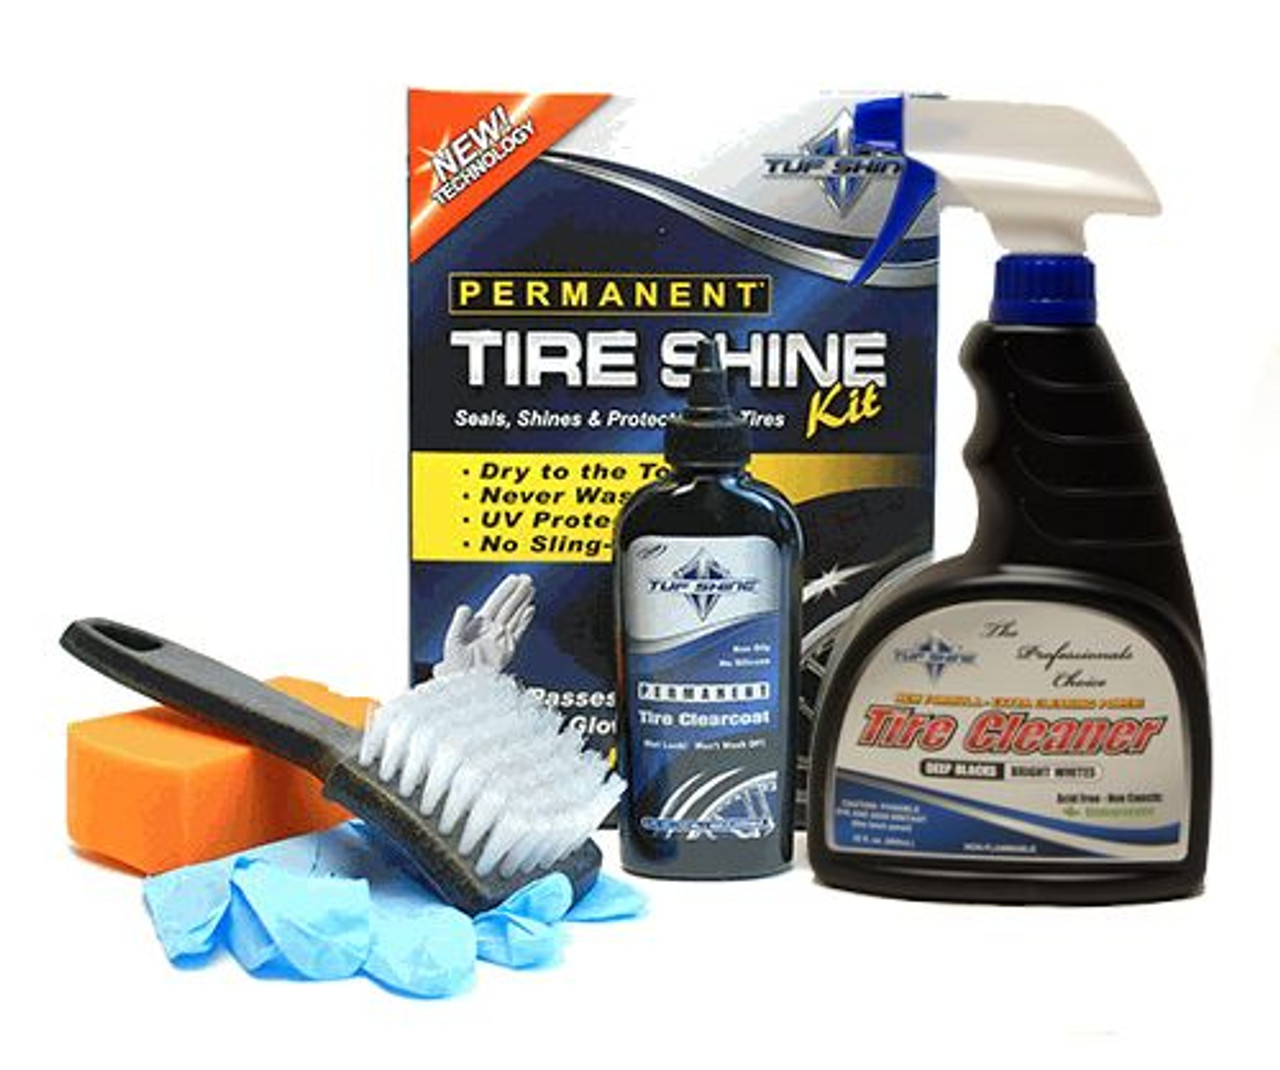  REV Auto Tire Shine Kit - Includes Tire Dressing and Tire Shine  Applicator, Easy to Use, No-Sling Formulation, Water Based Tire Shine  Spray